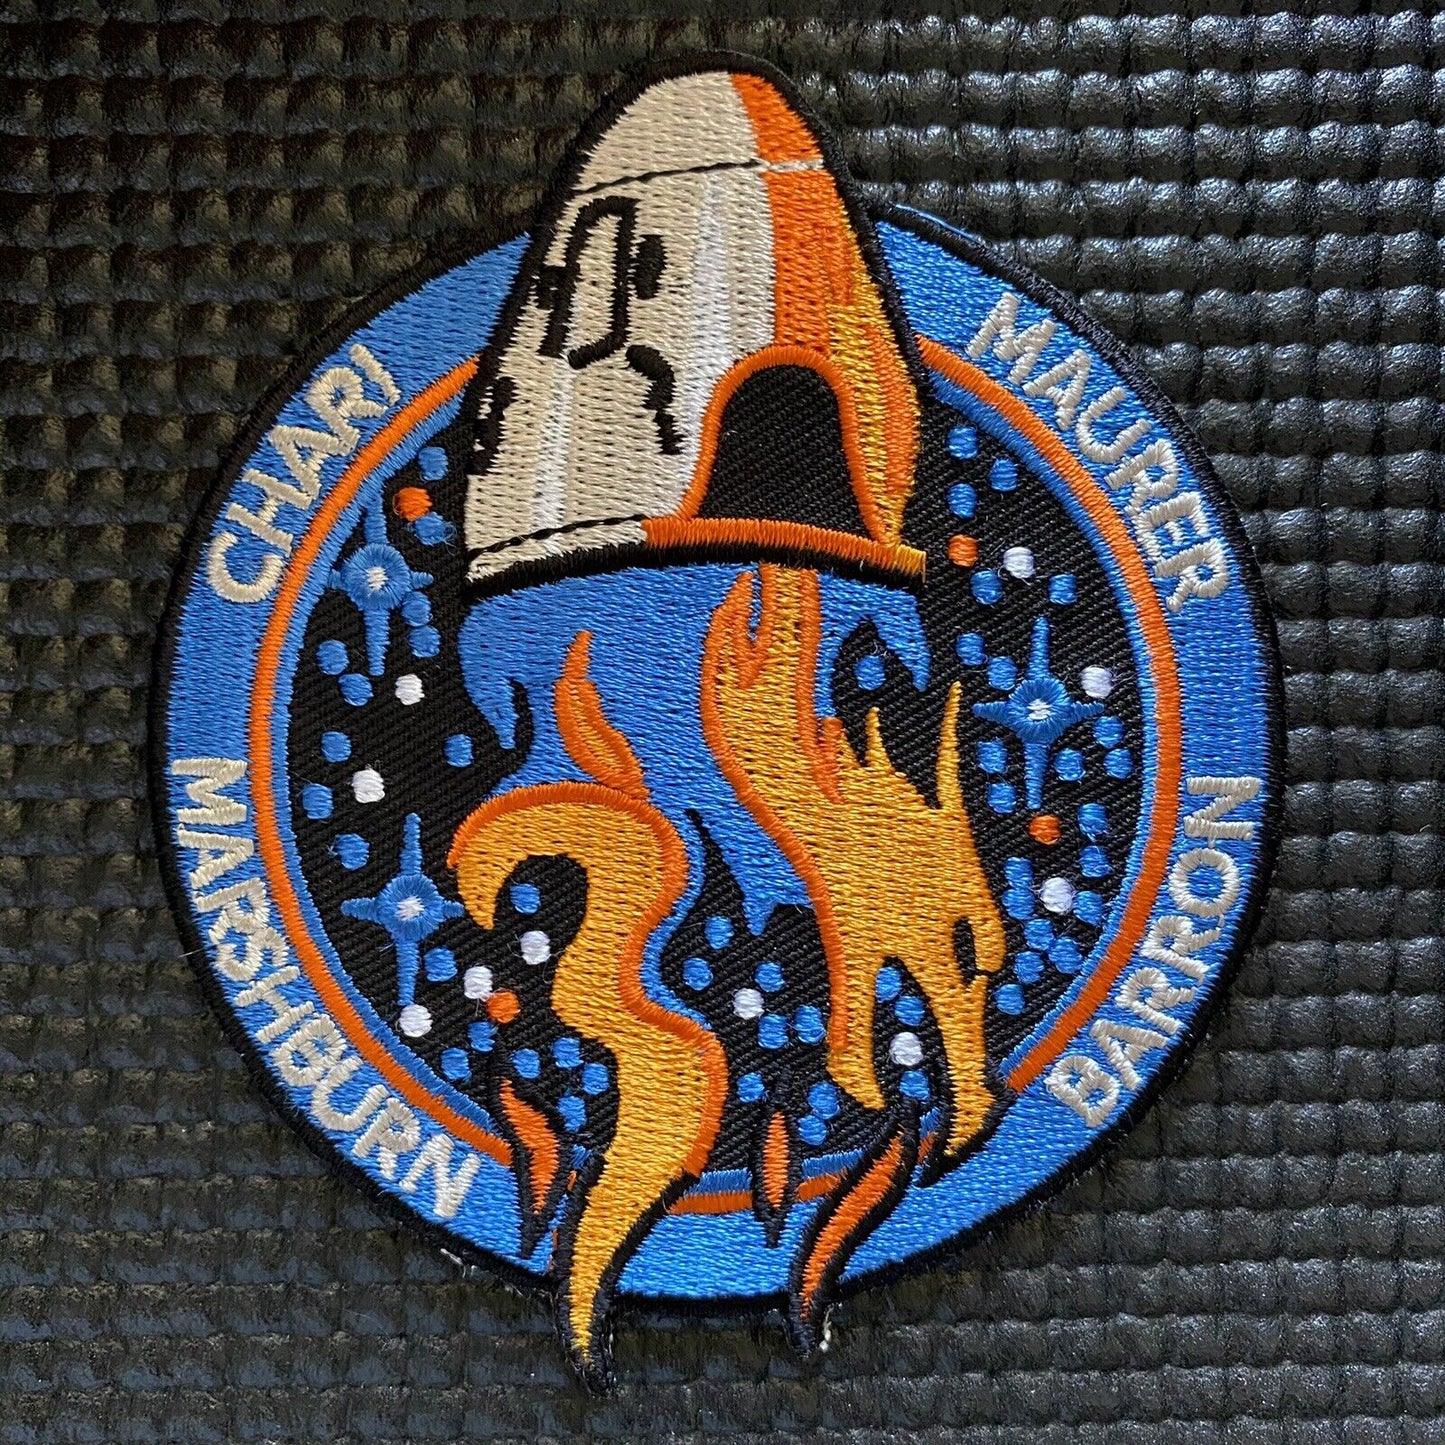 NASA’S SPACEX CREW-3-ASTRONAUT ISS MISSION PATCH - 4”